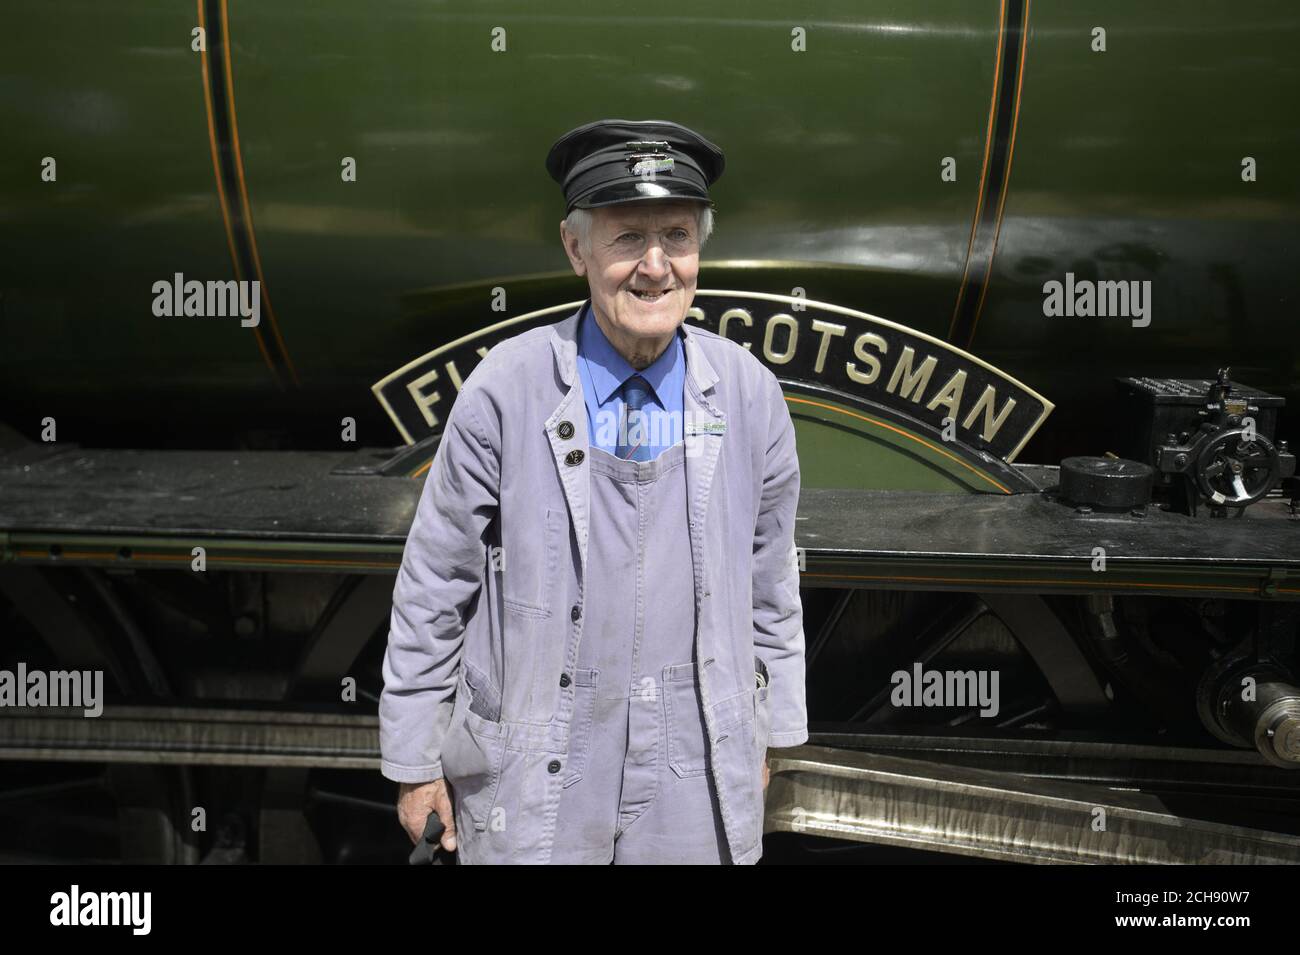 Engine fireman Gordon Hodgson, 77, from Carlisle, is photographed by fans of the train, as Flying Scotsman arrives at Tweedbank railway station from Edinburgh's Waverley station to Tweedbank in the Borders, as it continues its tour of Britain after Network Rail reversed a decision to cancel trips at short notice. Stock Photo